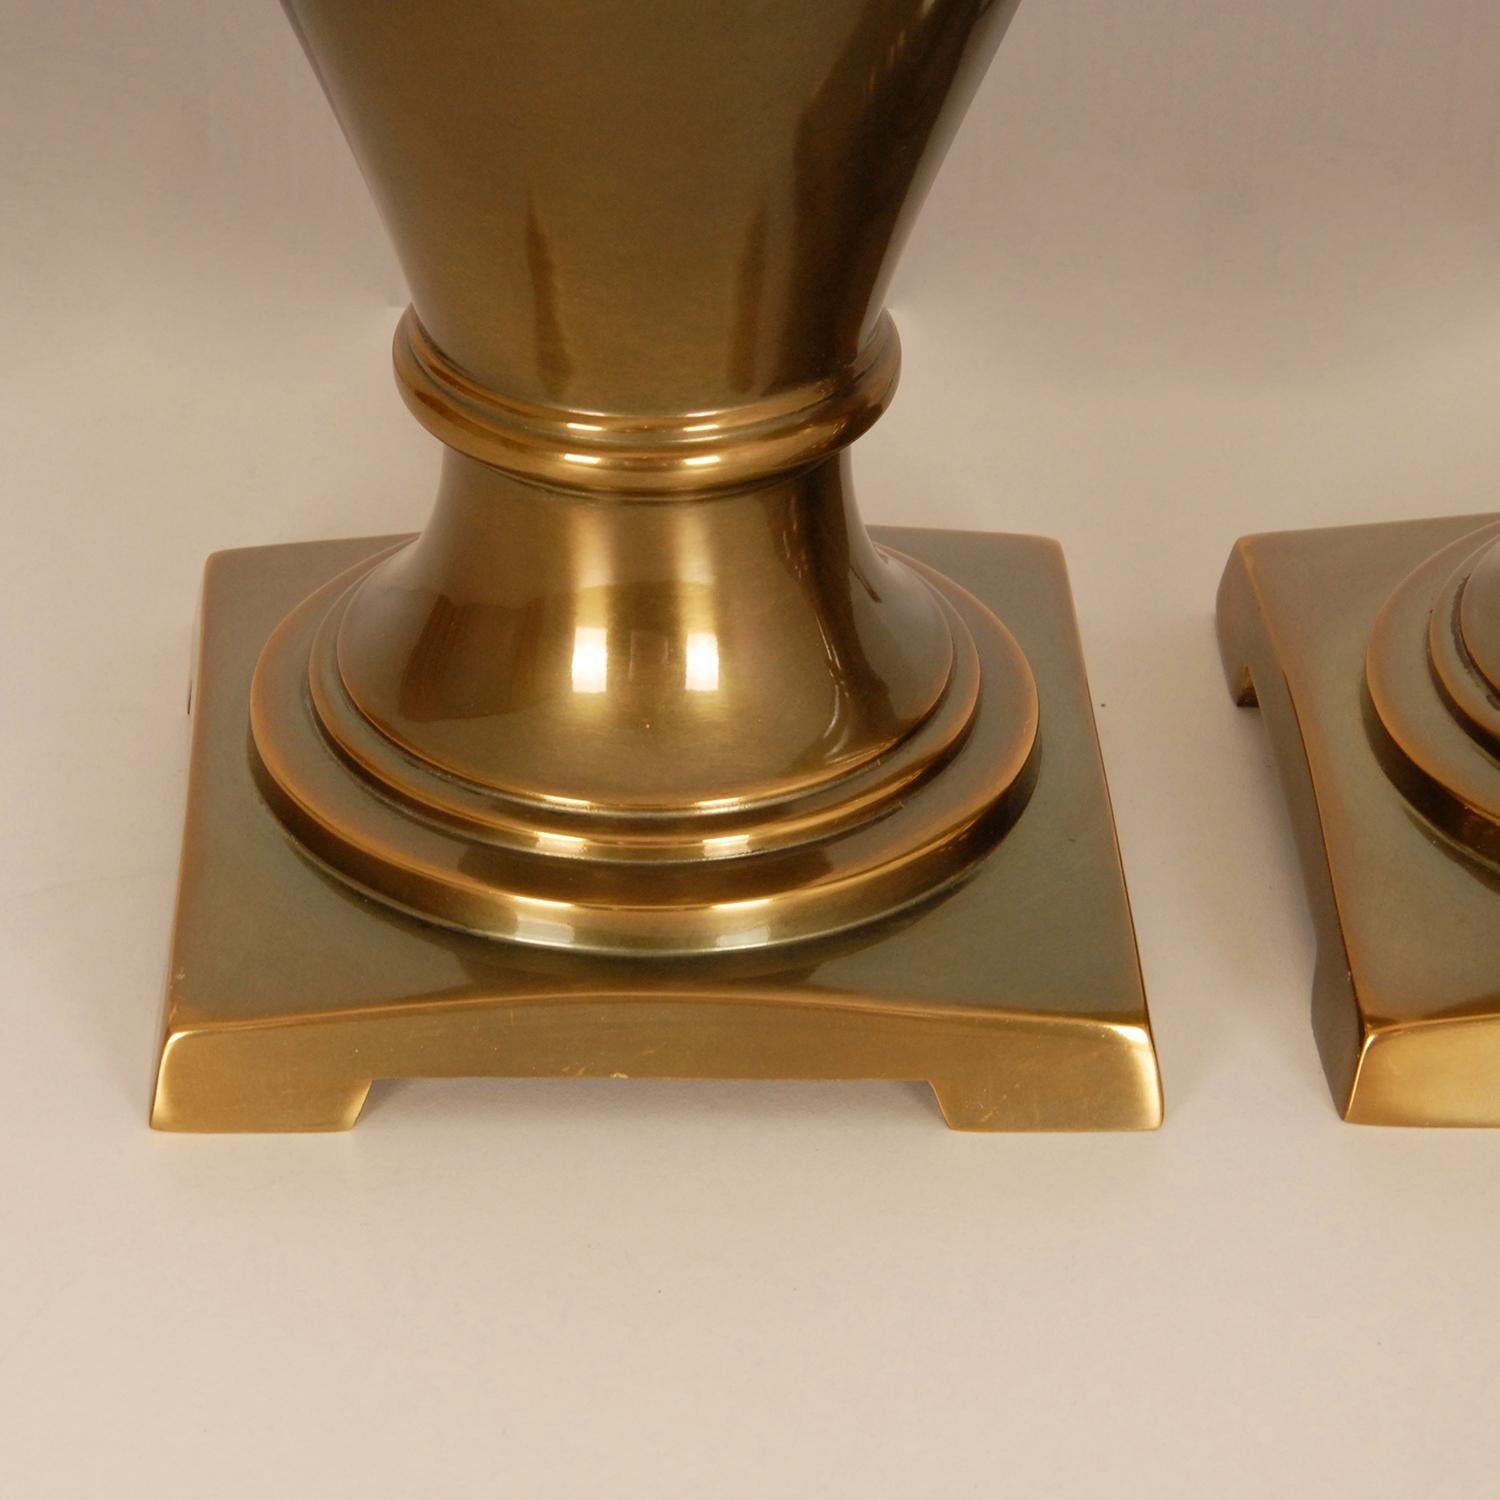 Vintage 1970s Gold Gilt Brass Neoclassical Vase Table Lamps, a Pair For Sale 2